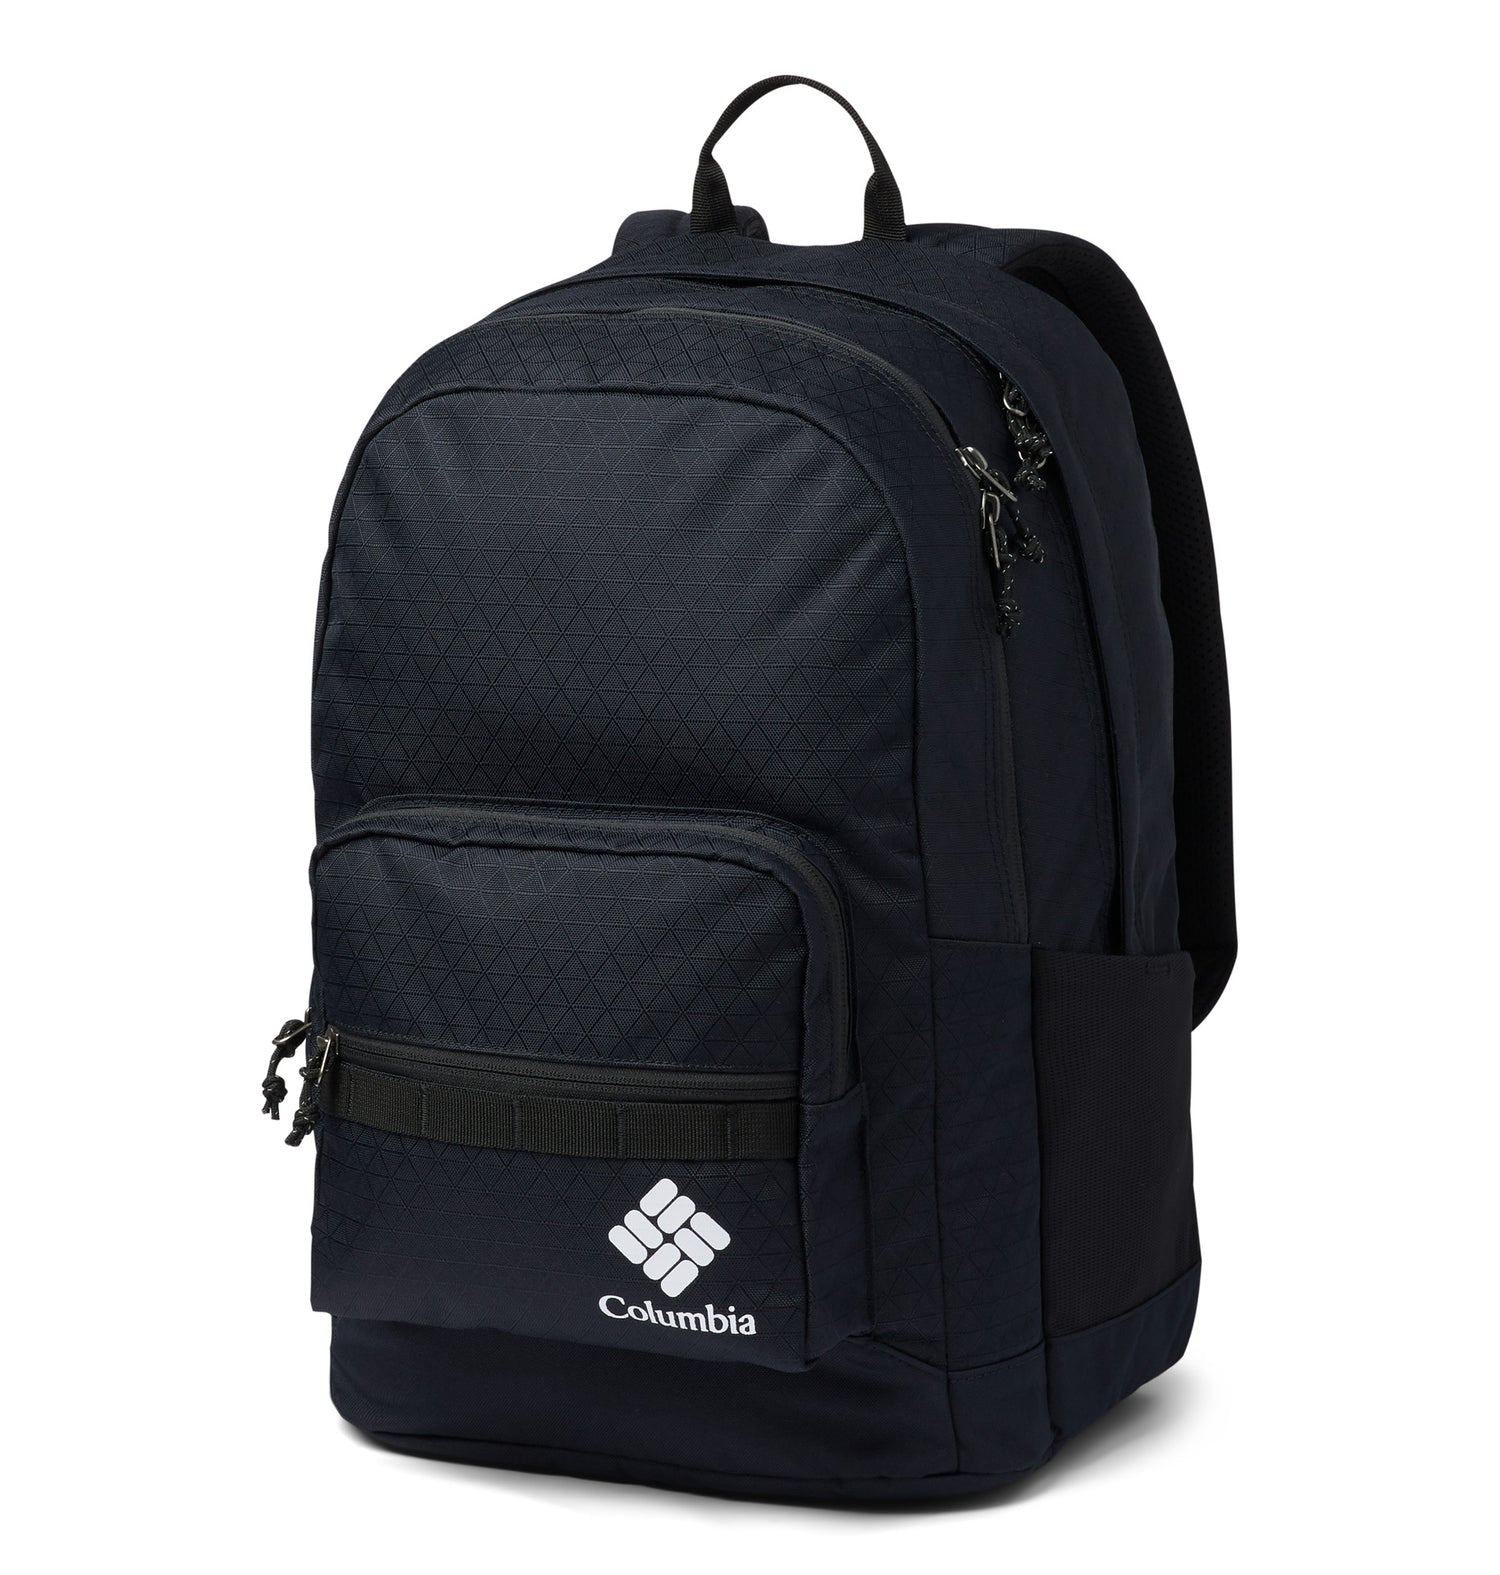 Angle view of a black backpack called Zig Zag designed by Columbia showing its logo printed on the front compartment, a top handle, and multiple zipper tabs.